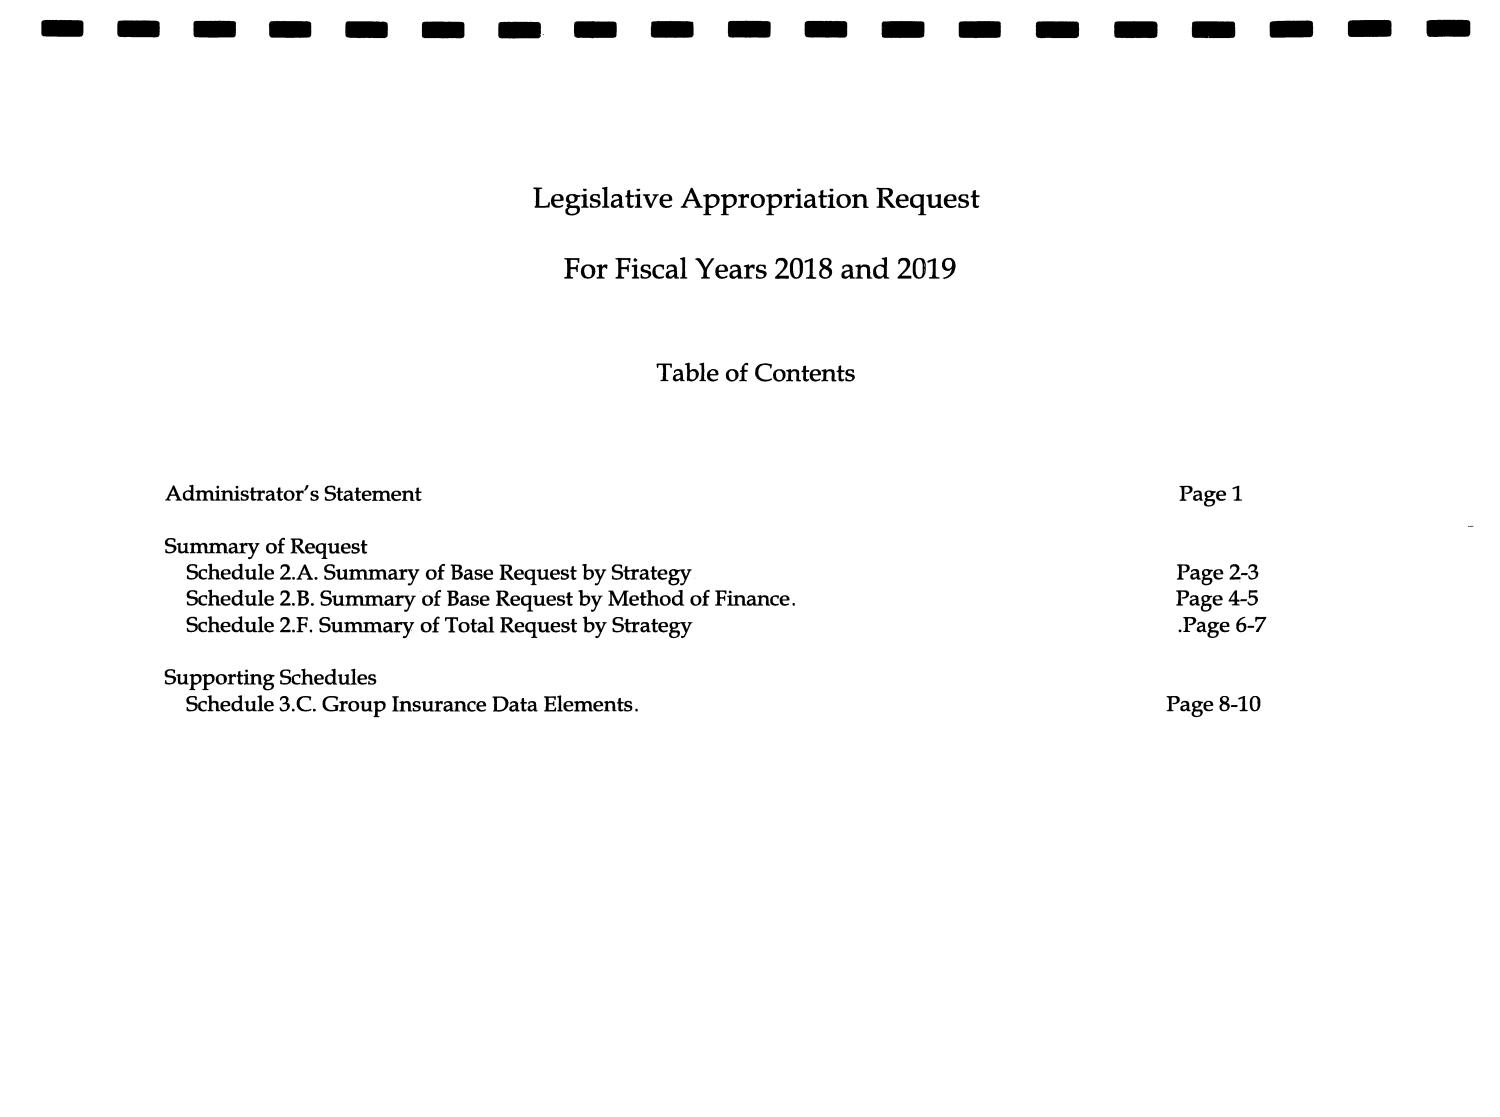 Cisco College Requests for Legislative Appropriations: 2018 and 2019
                                                
                                                    Table Of Contents
                                                